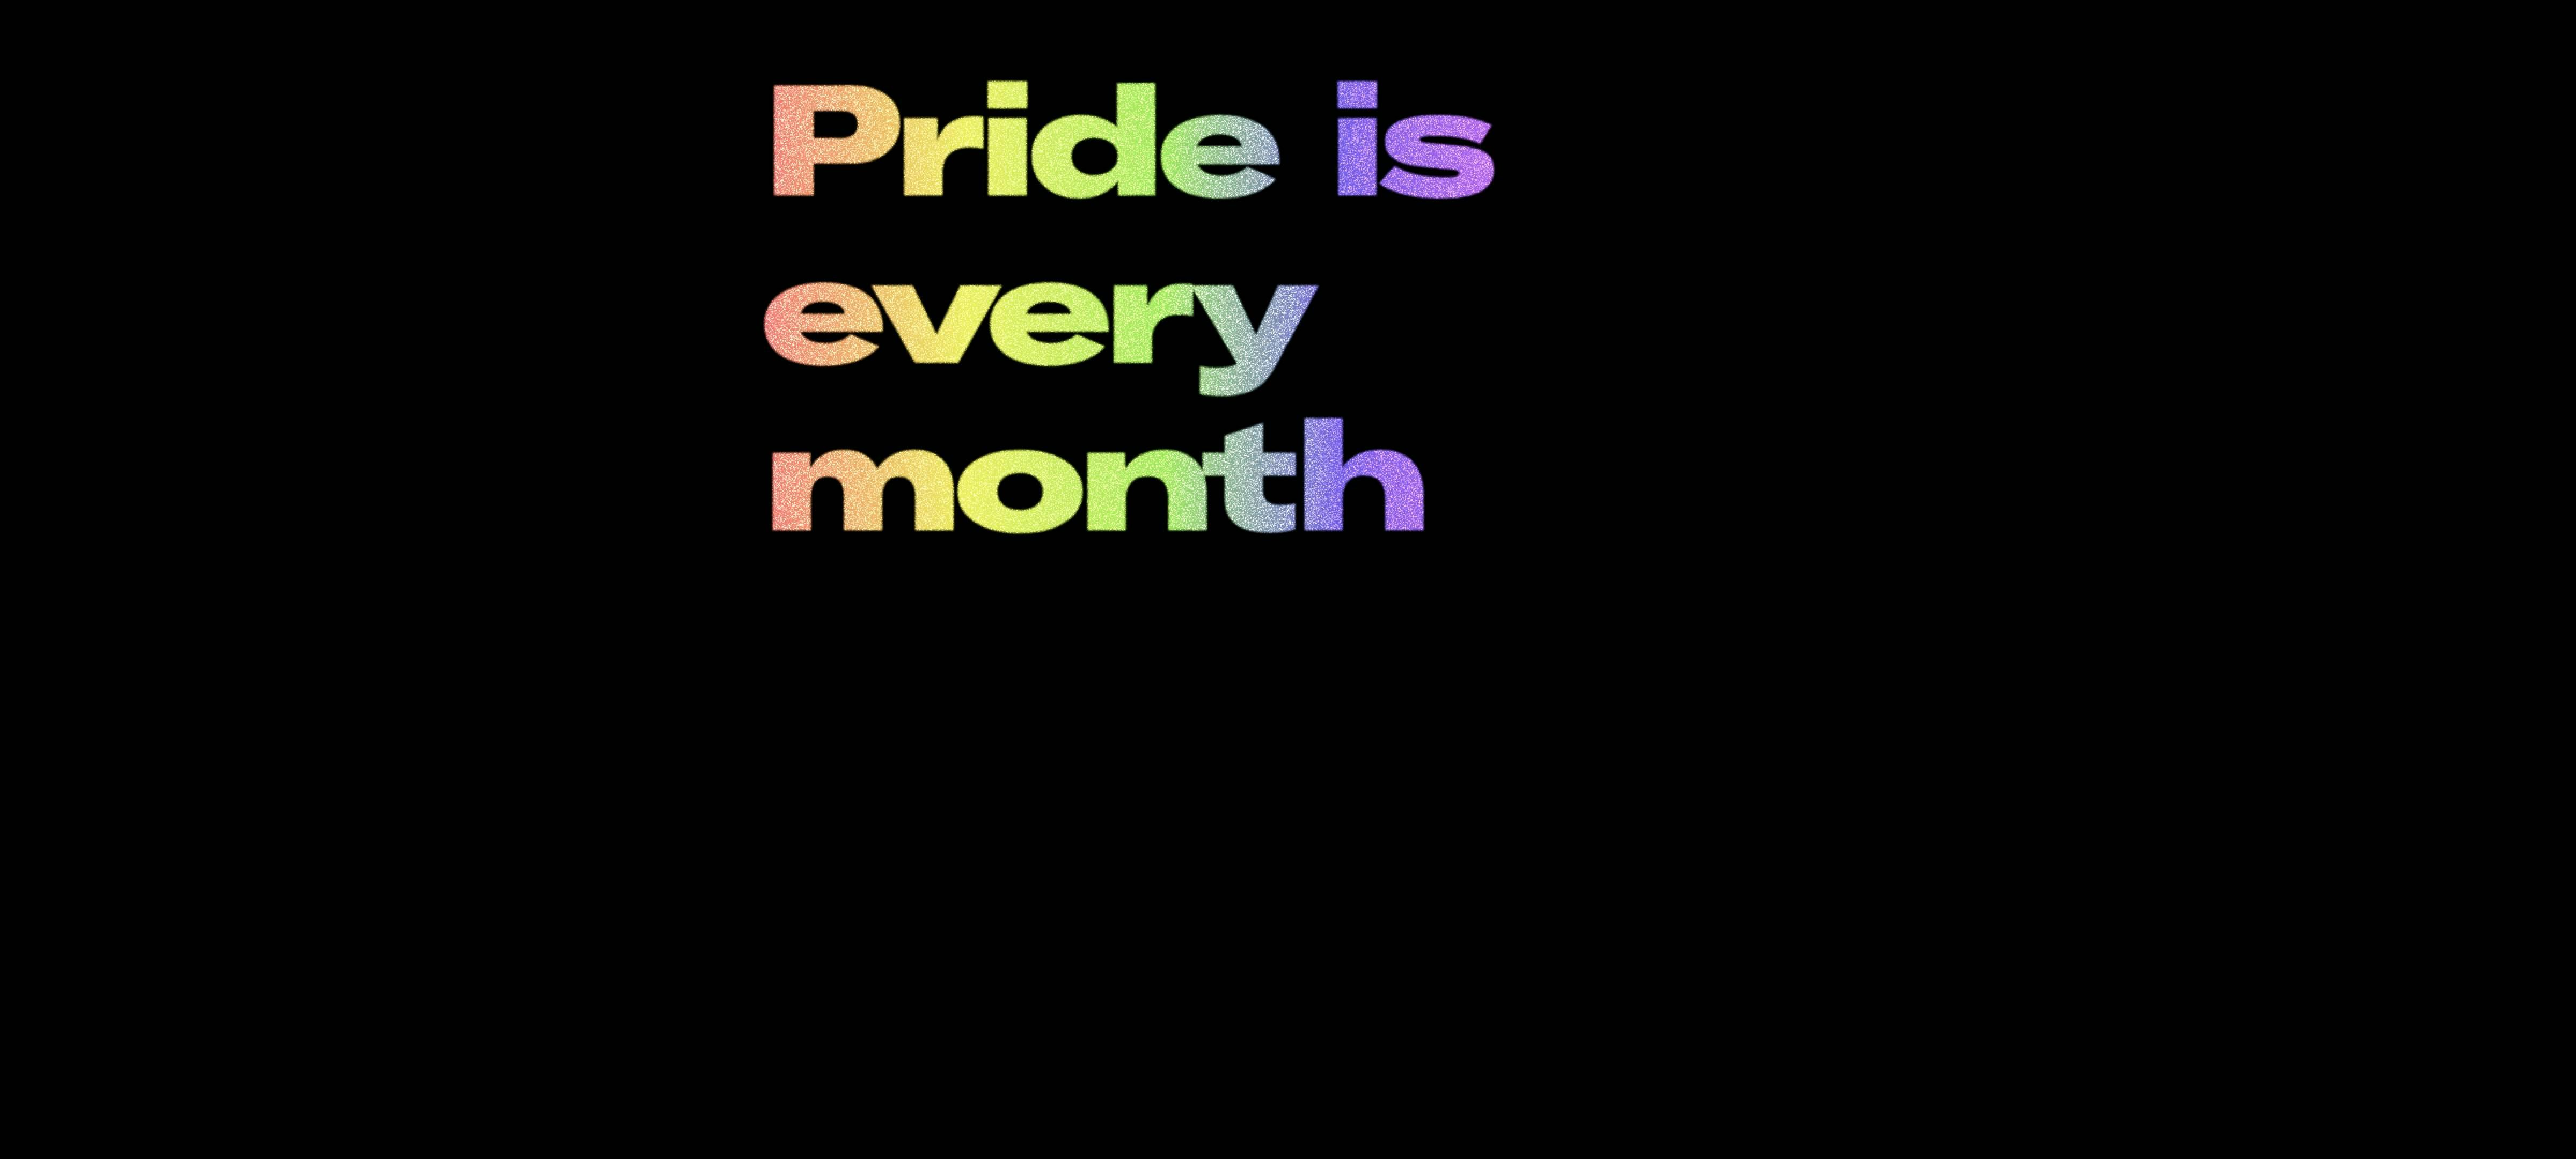 Pride is every month